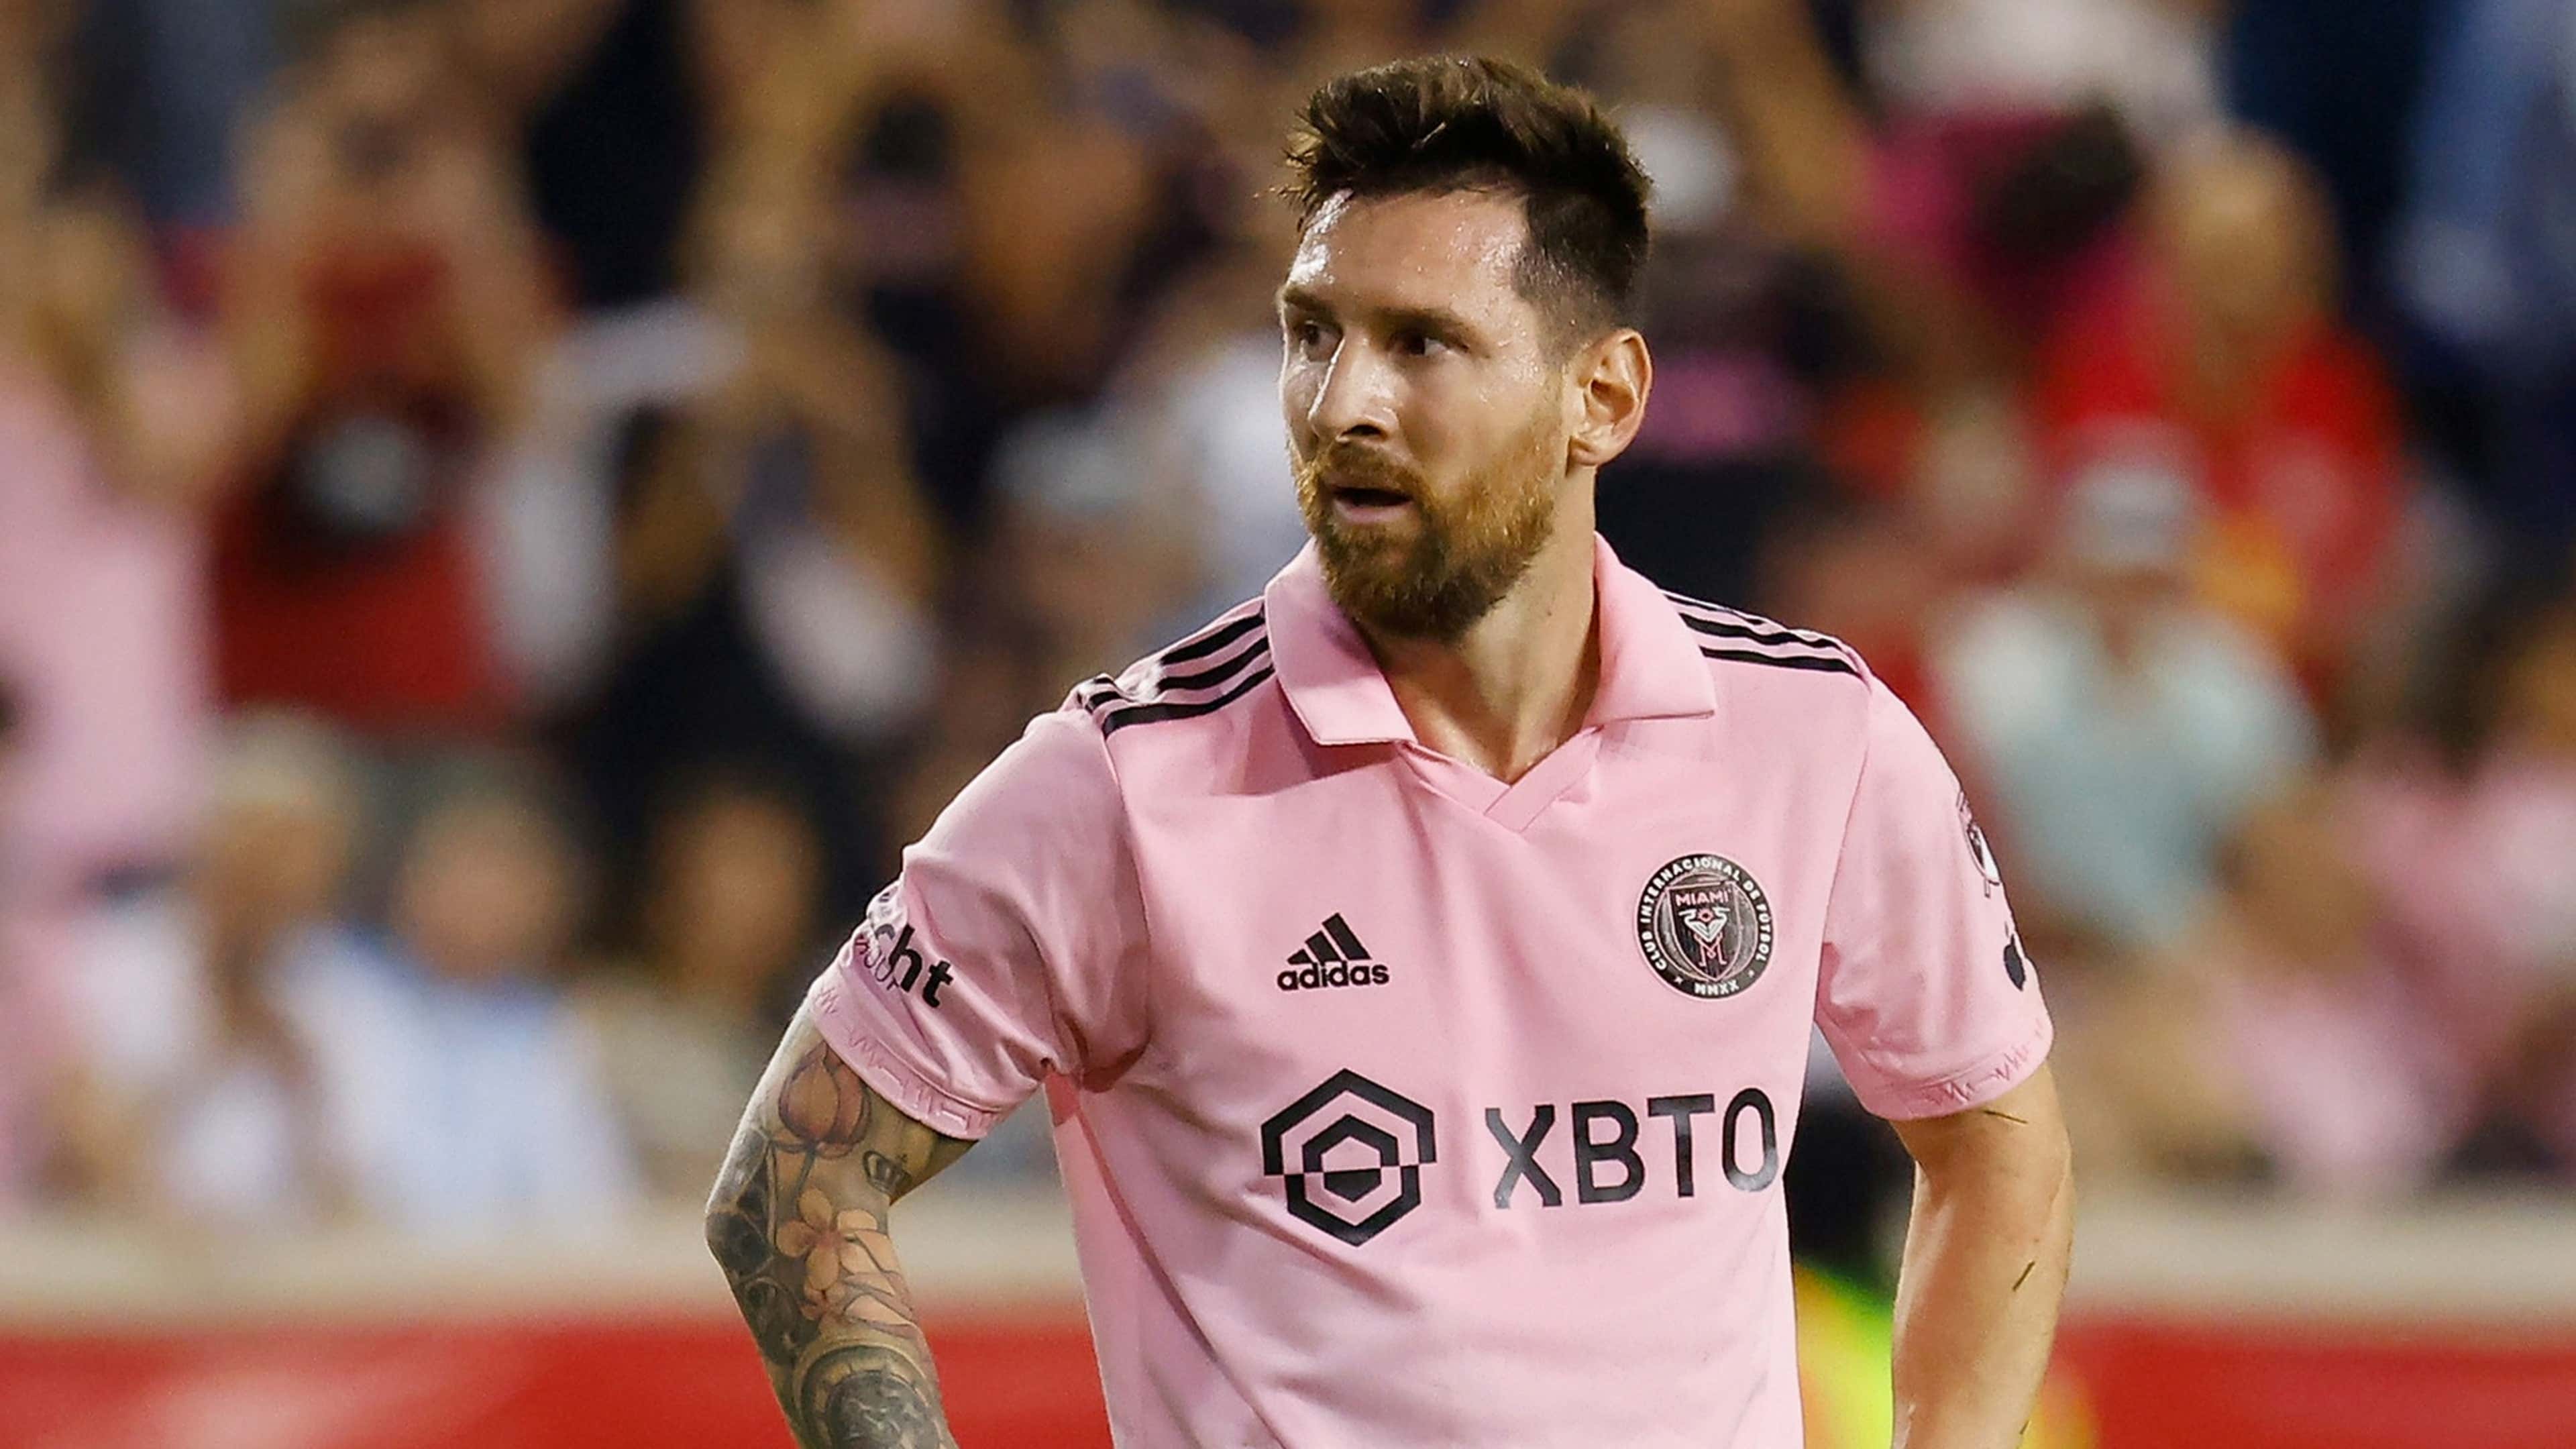 Will Lionel Messi play on turf against Atlanta United?